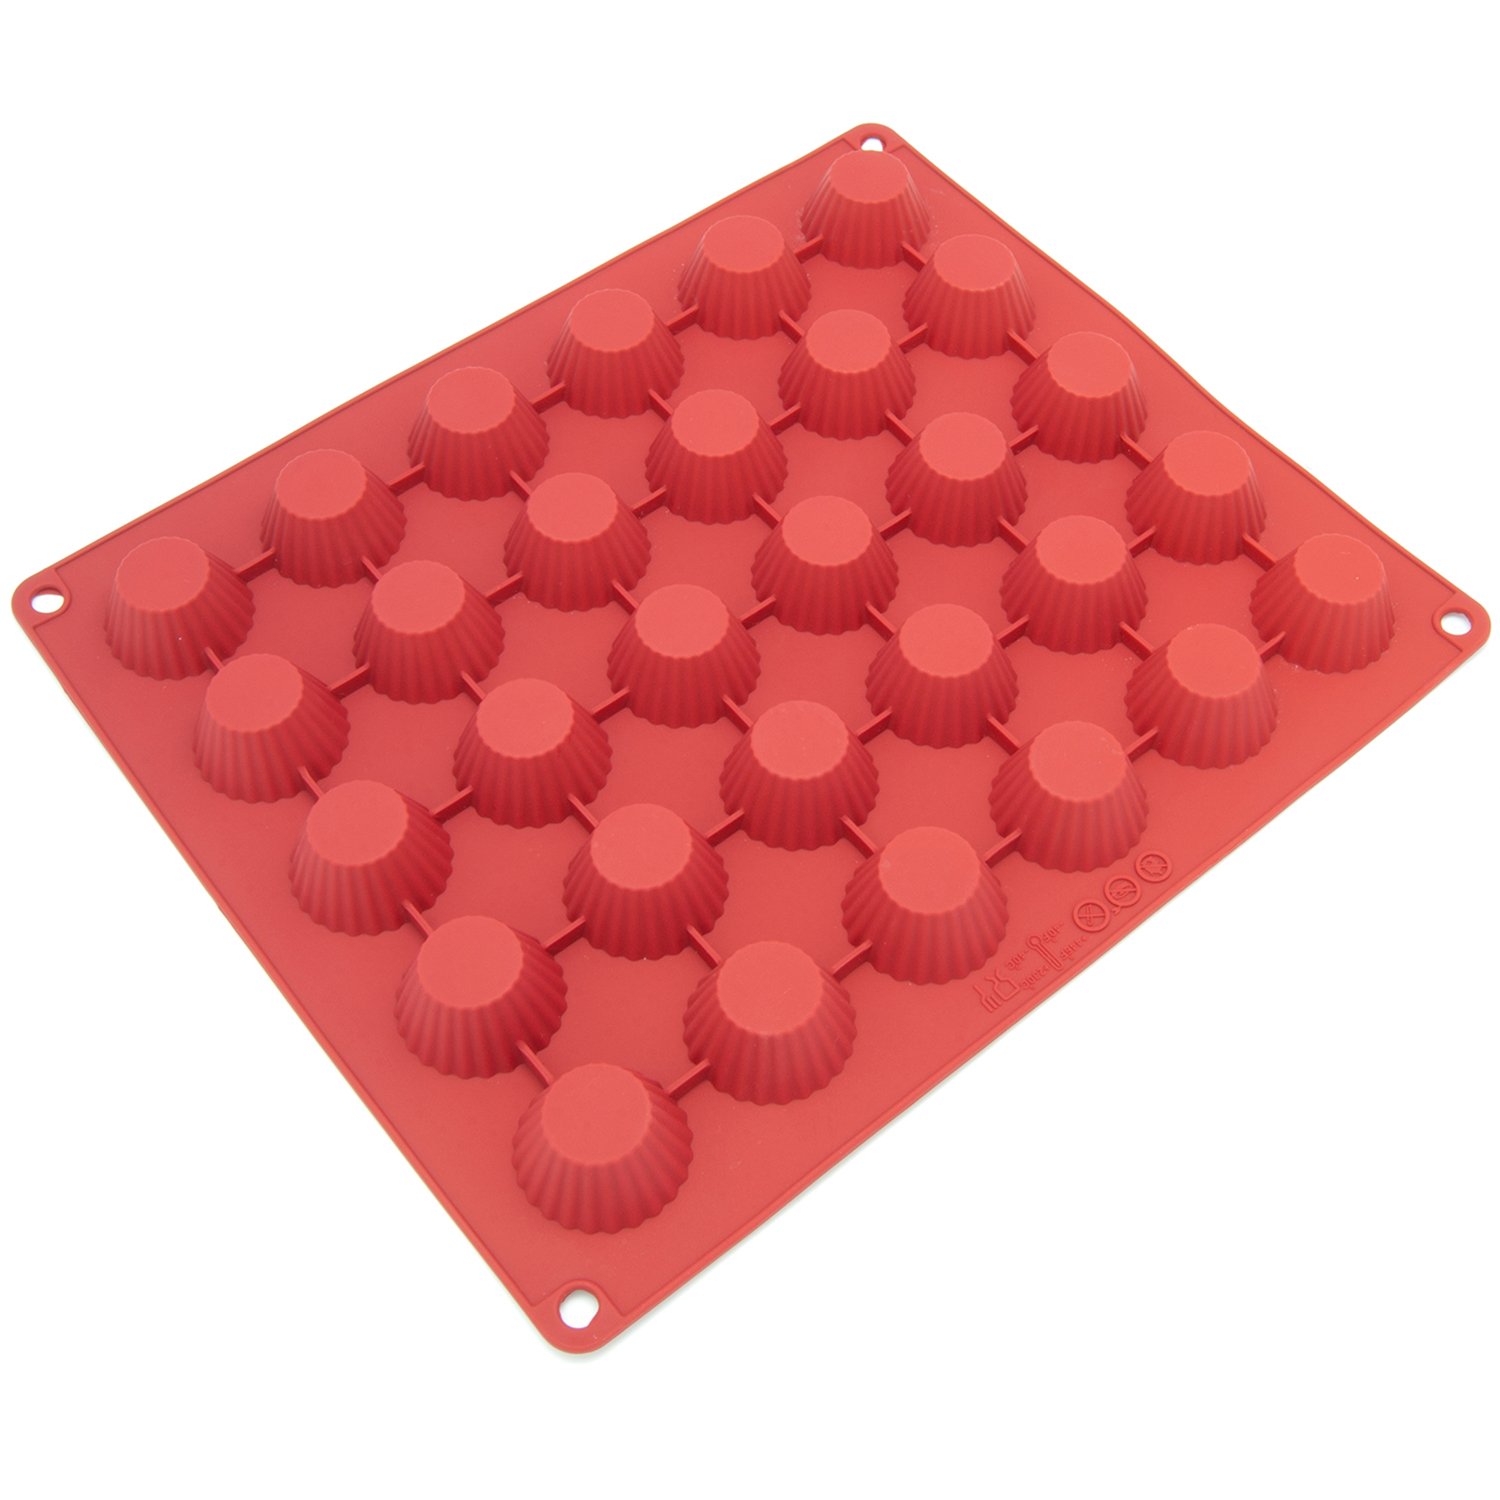 Silicone Chocolate Candy Molds - Non Stick, BPA Free, Reusable 100% Silicon & Dishwasher Safe Silicon - Kitchen Rubber Tray For Ice, Crayons, Fat Bombs and Soap Molds - image 1 of 3